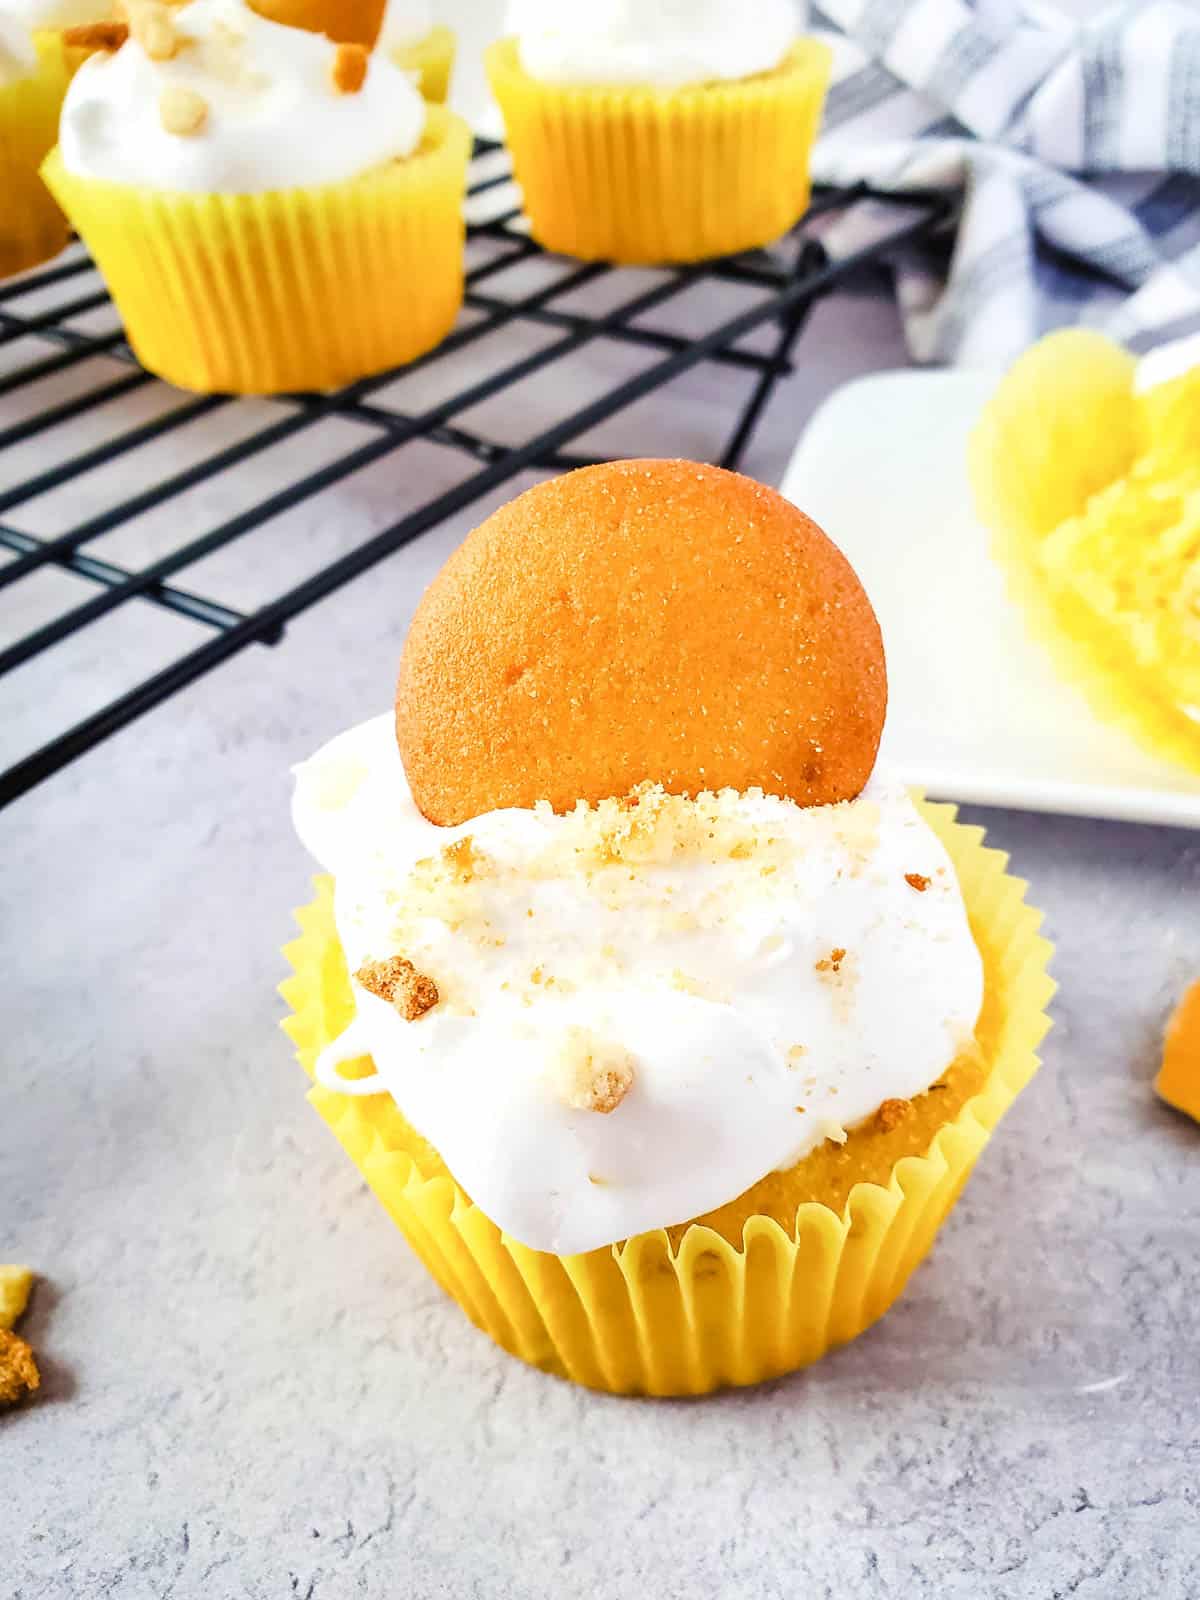 A Banana Pudding cupcake in front of a cooling rack holding more cupcakes.